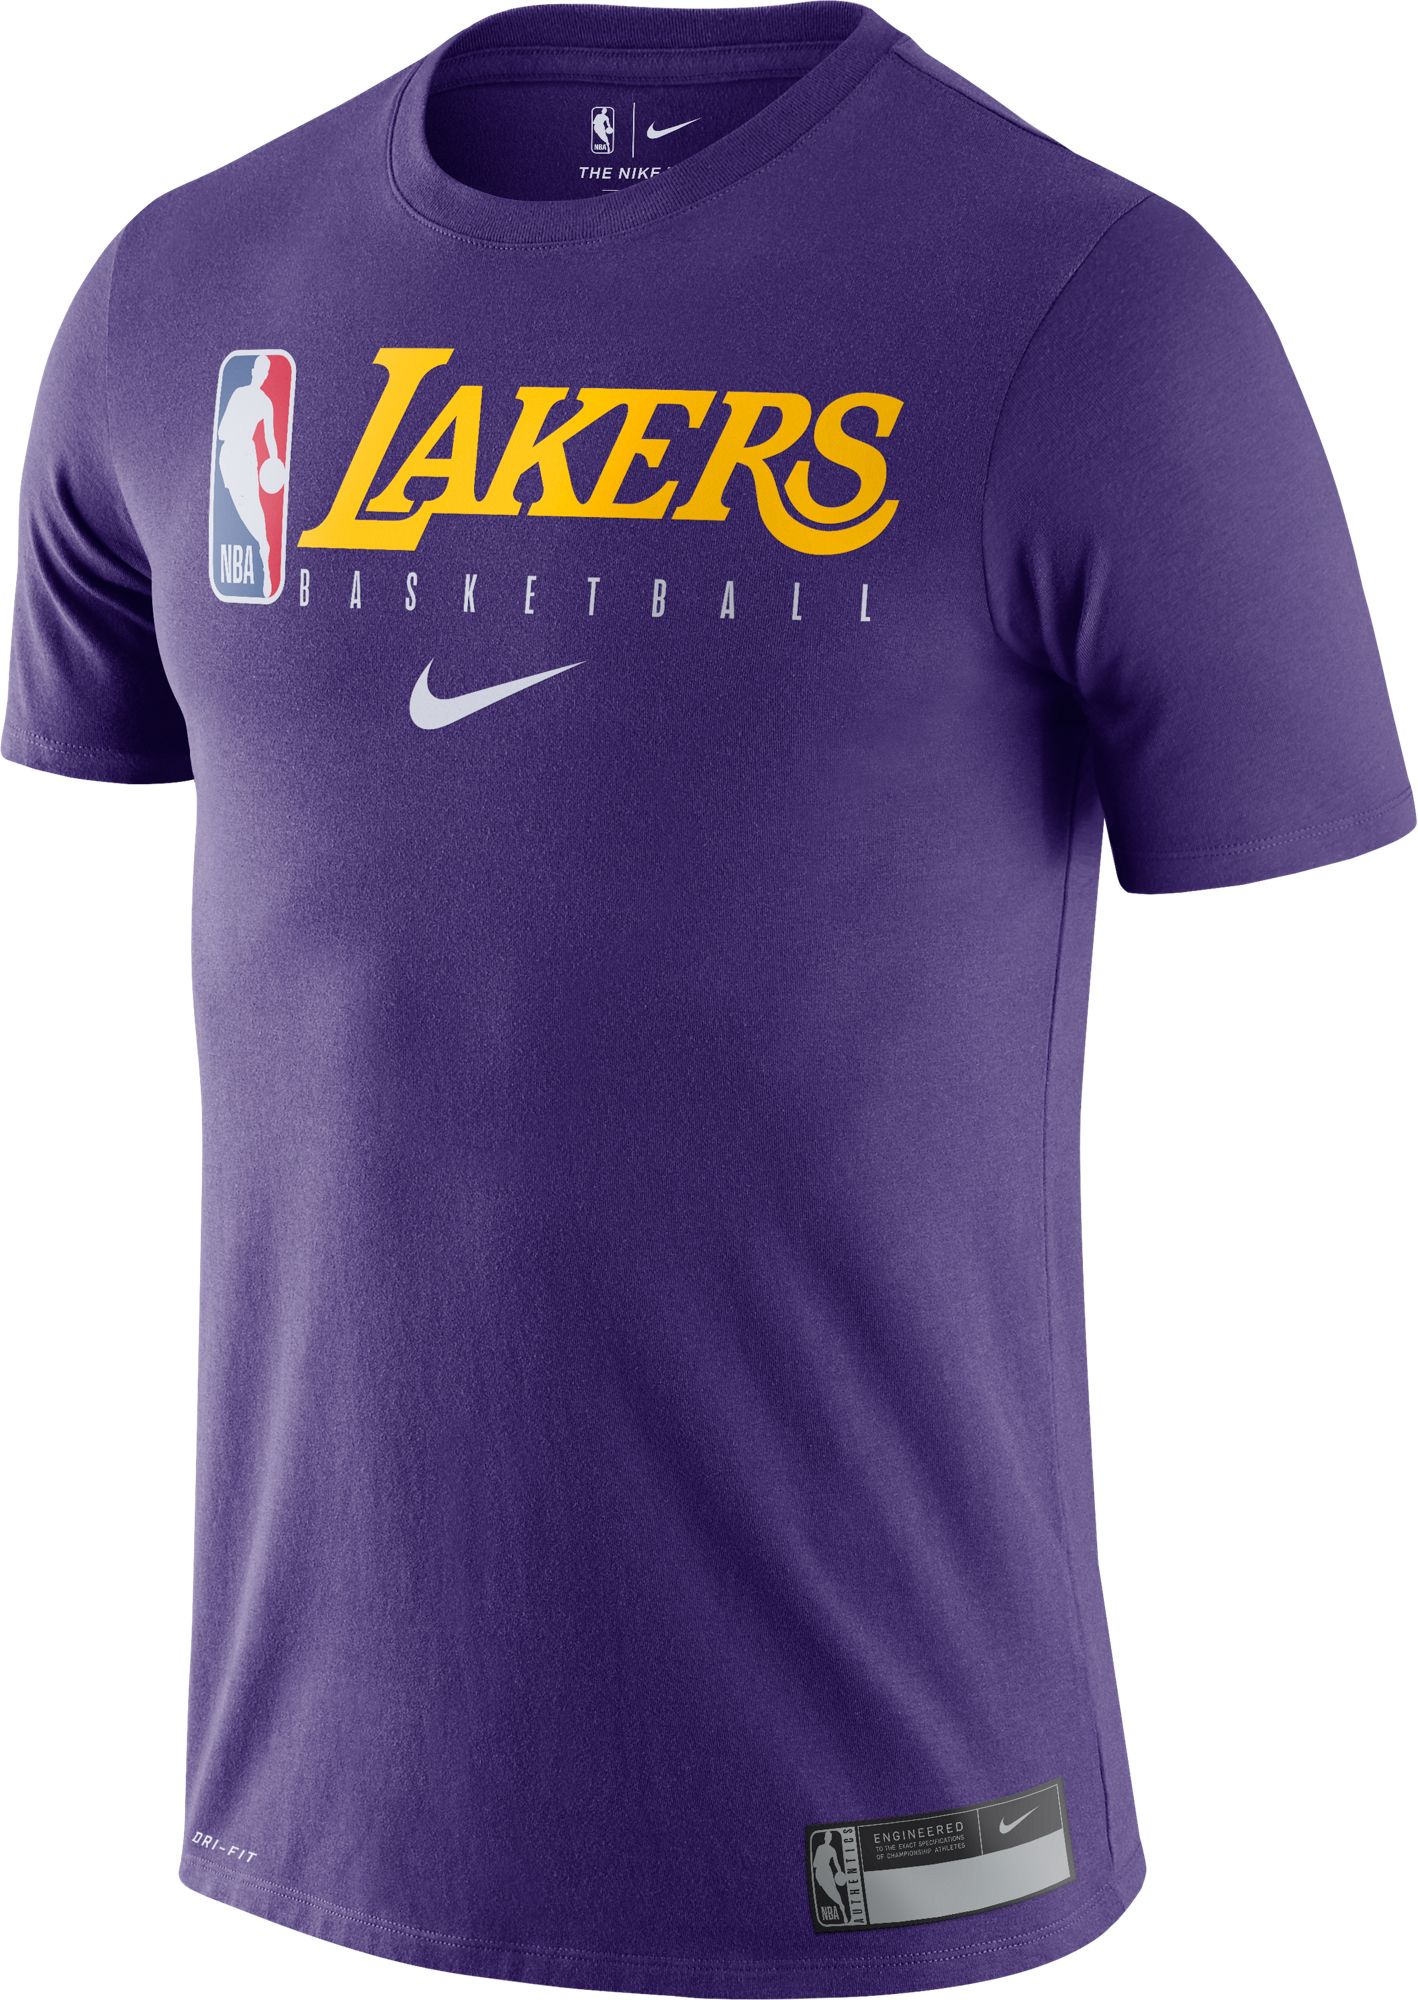 lakers practice jersey nike